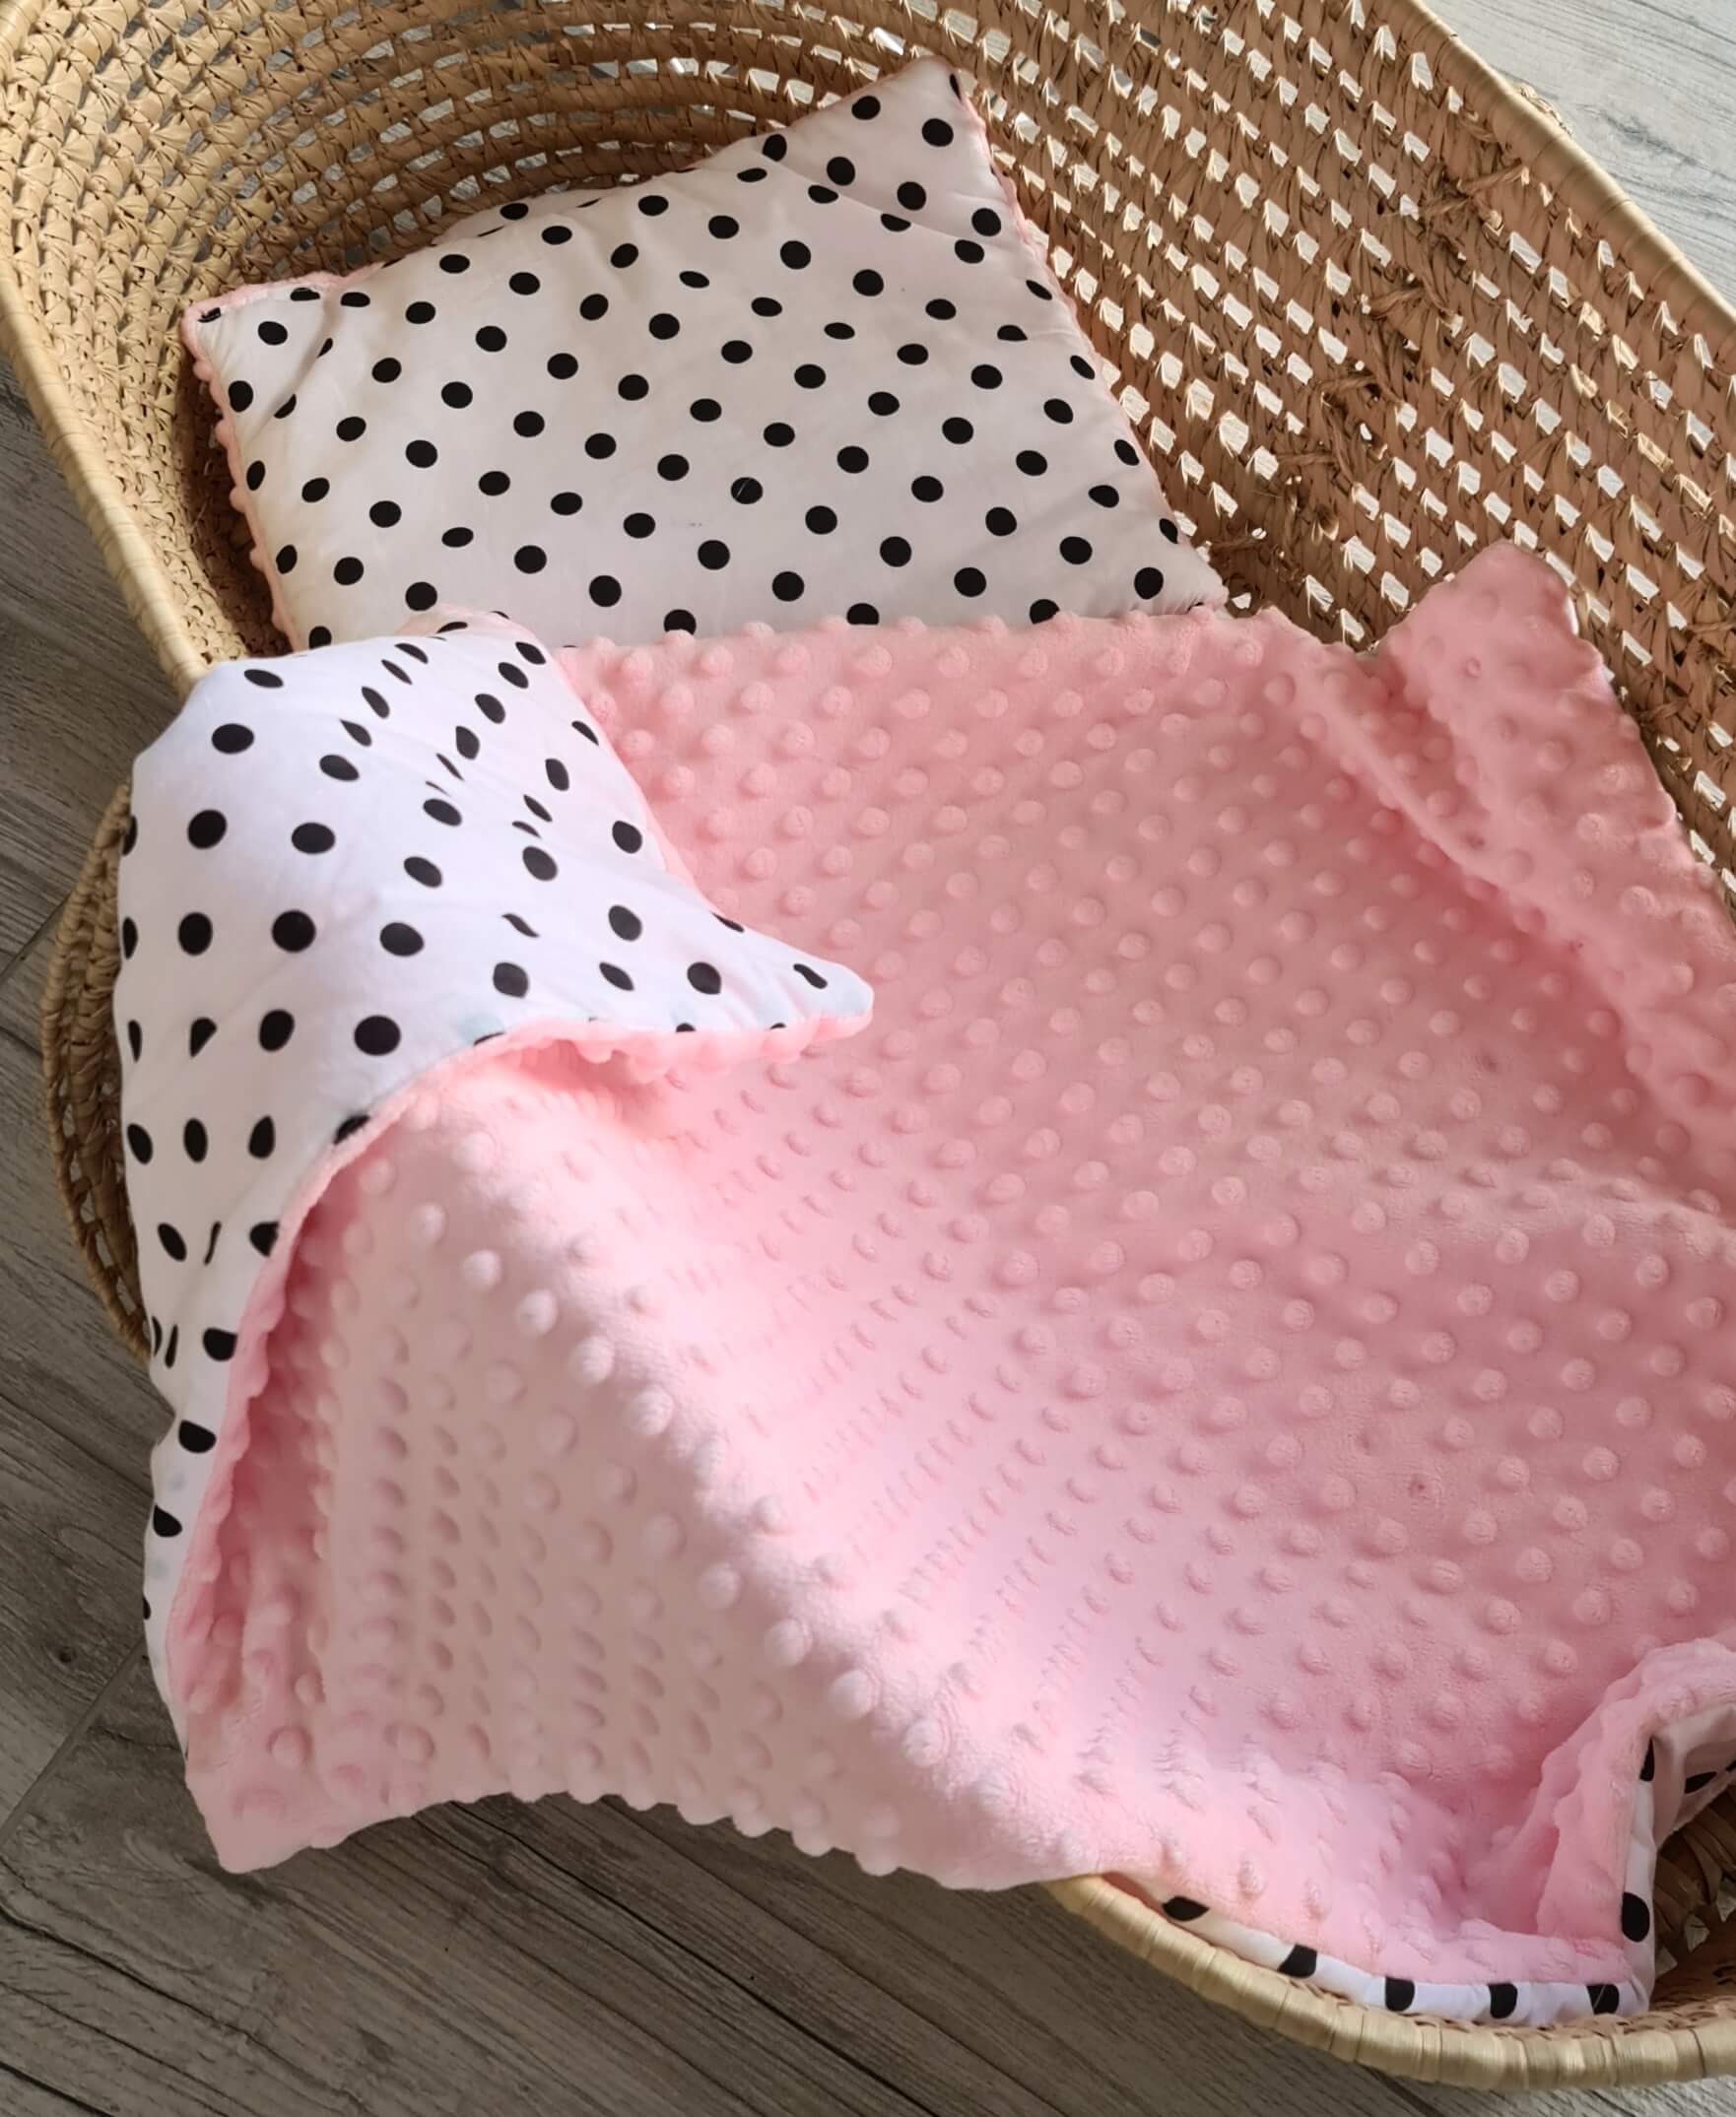 baby blanket and pillow pink and white polka dots pattern for newborn evcushy